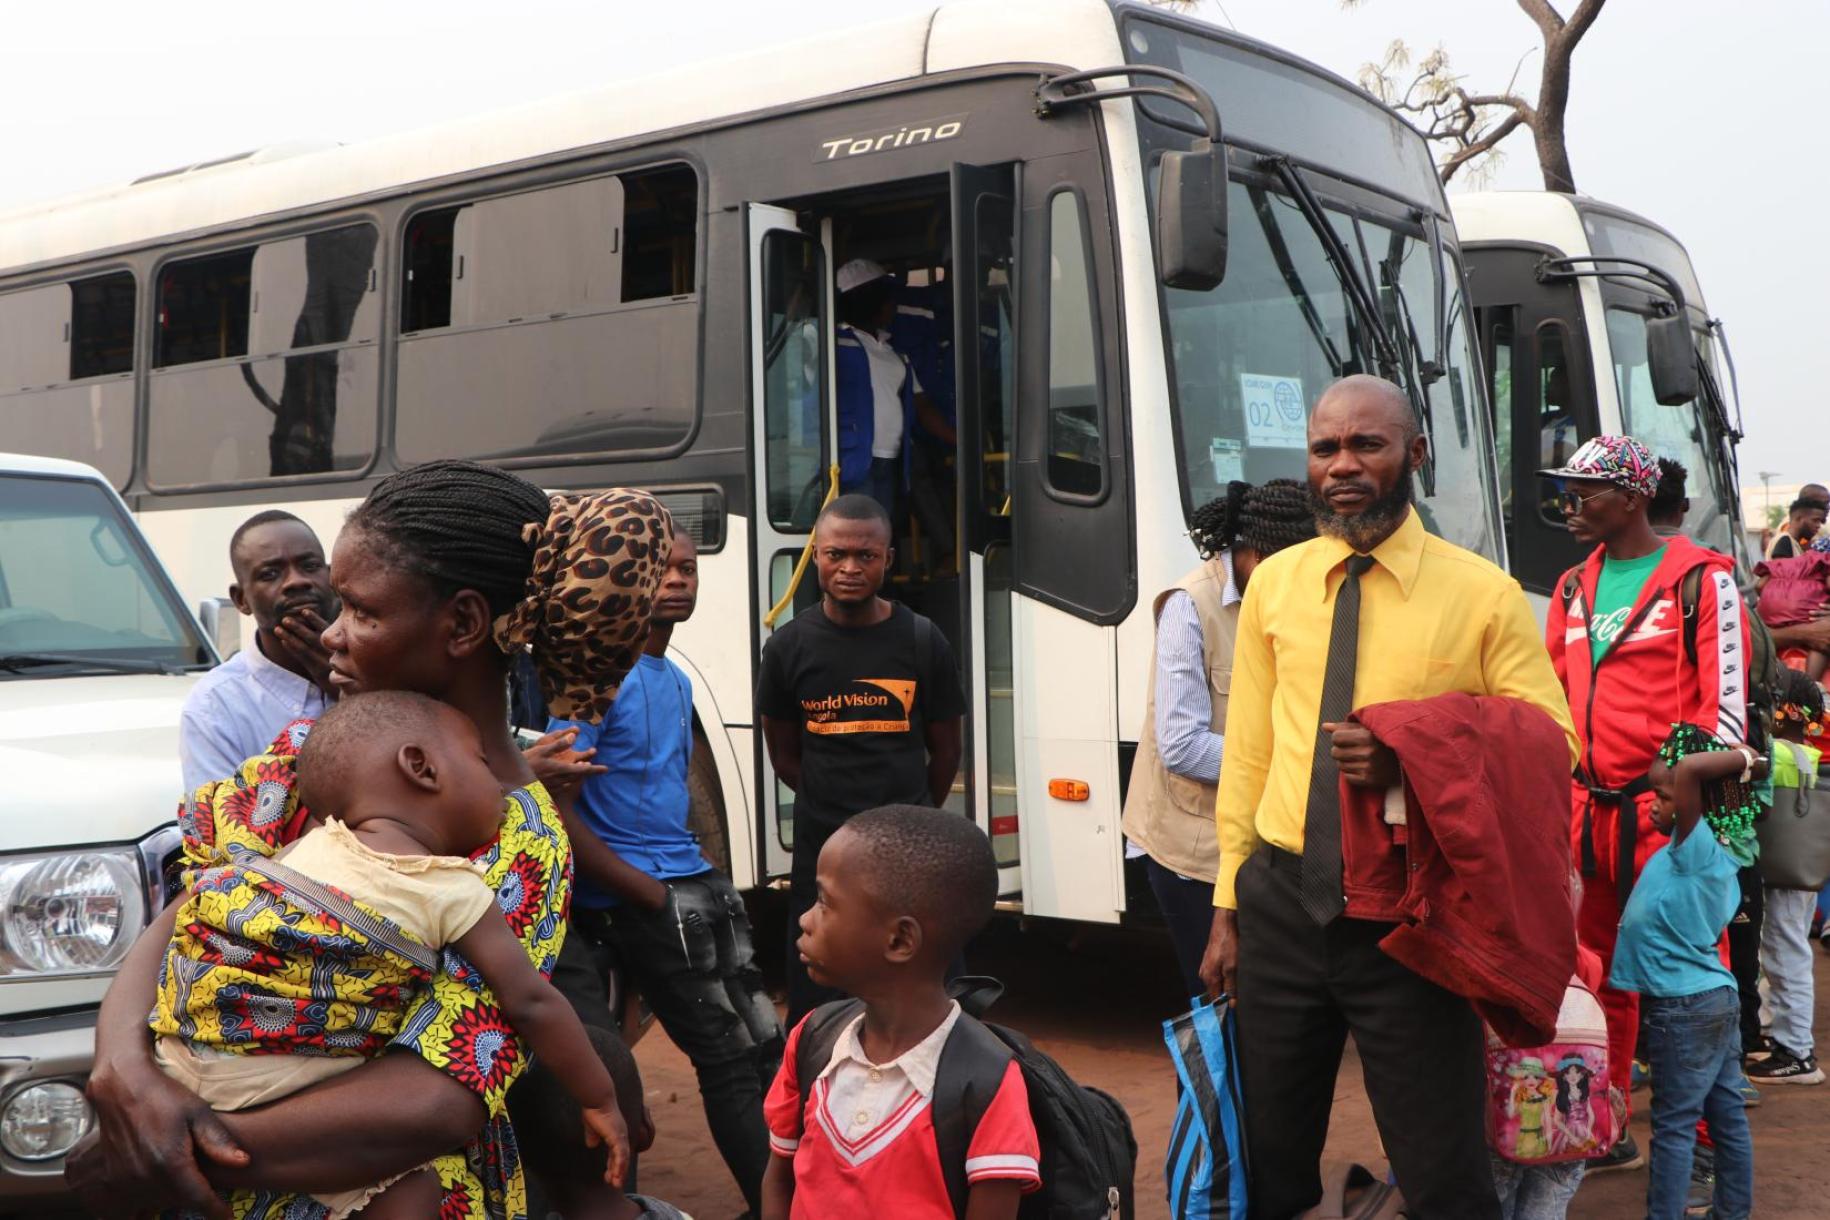 In Angola, refugee men, women and children arrive one after the other in front of buses waiting to take them to the border with the Democratic Republic of Congo.